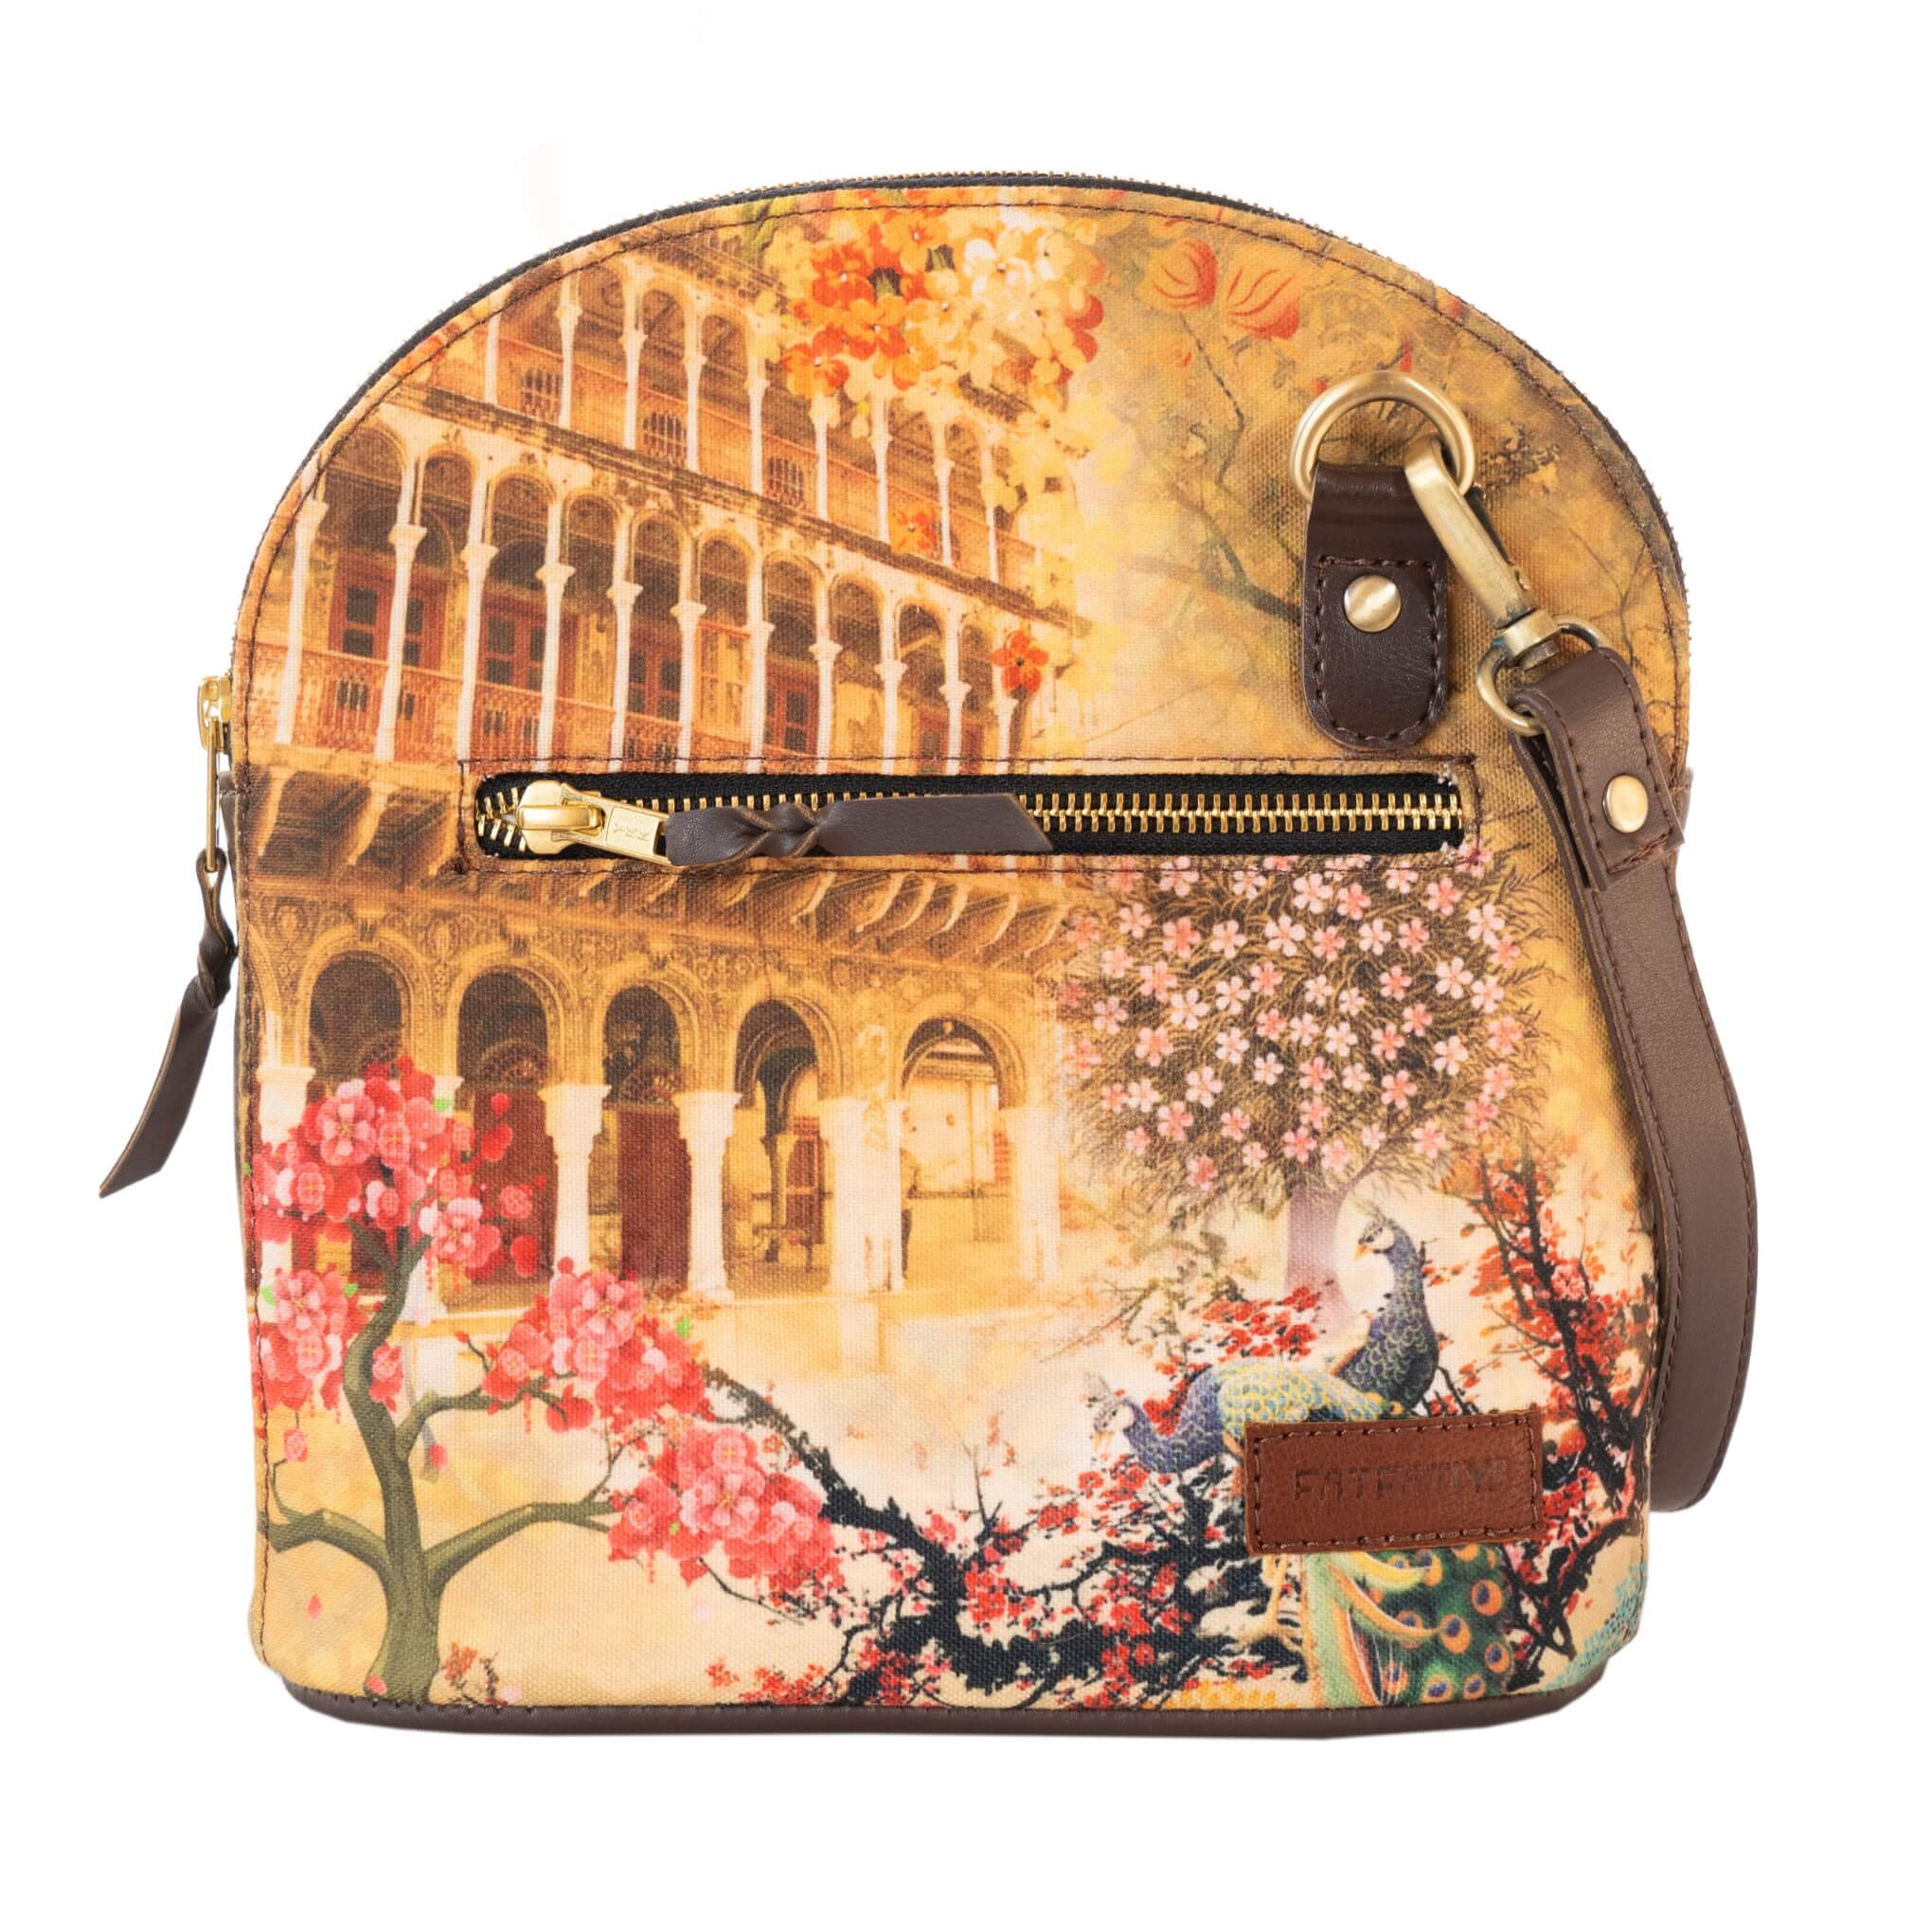 Fort and Floral Fashion Crossbody Bag